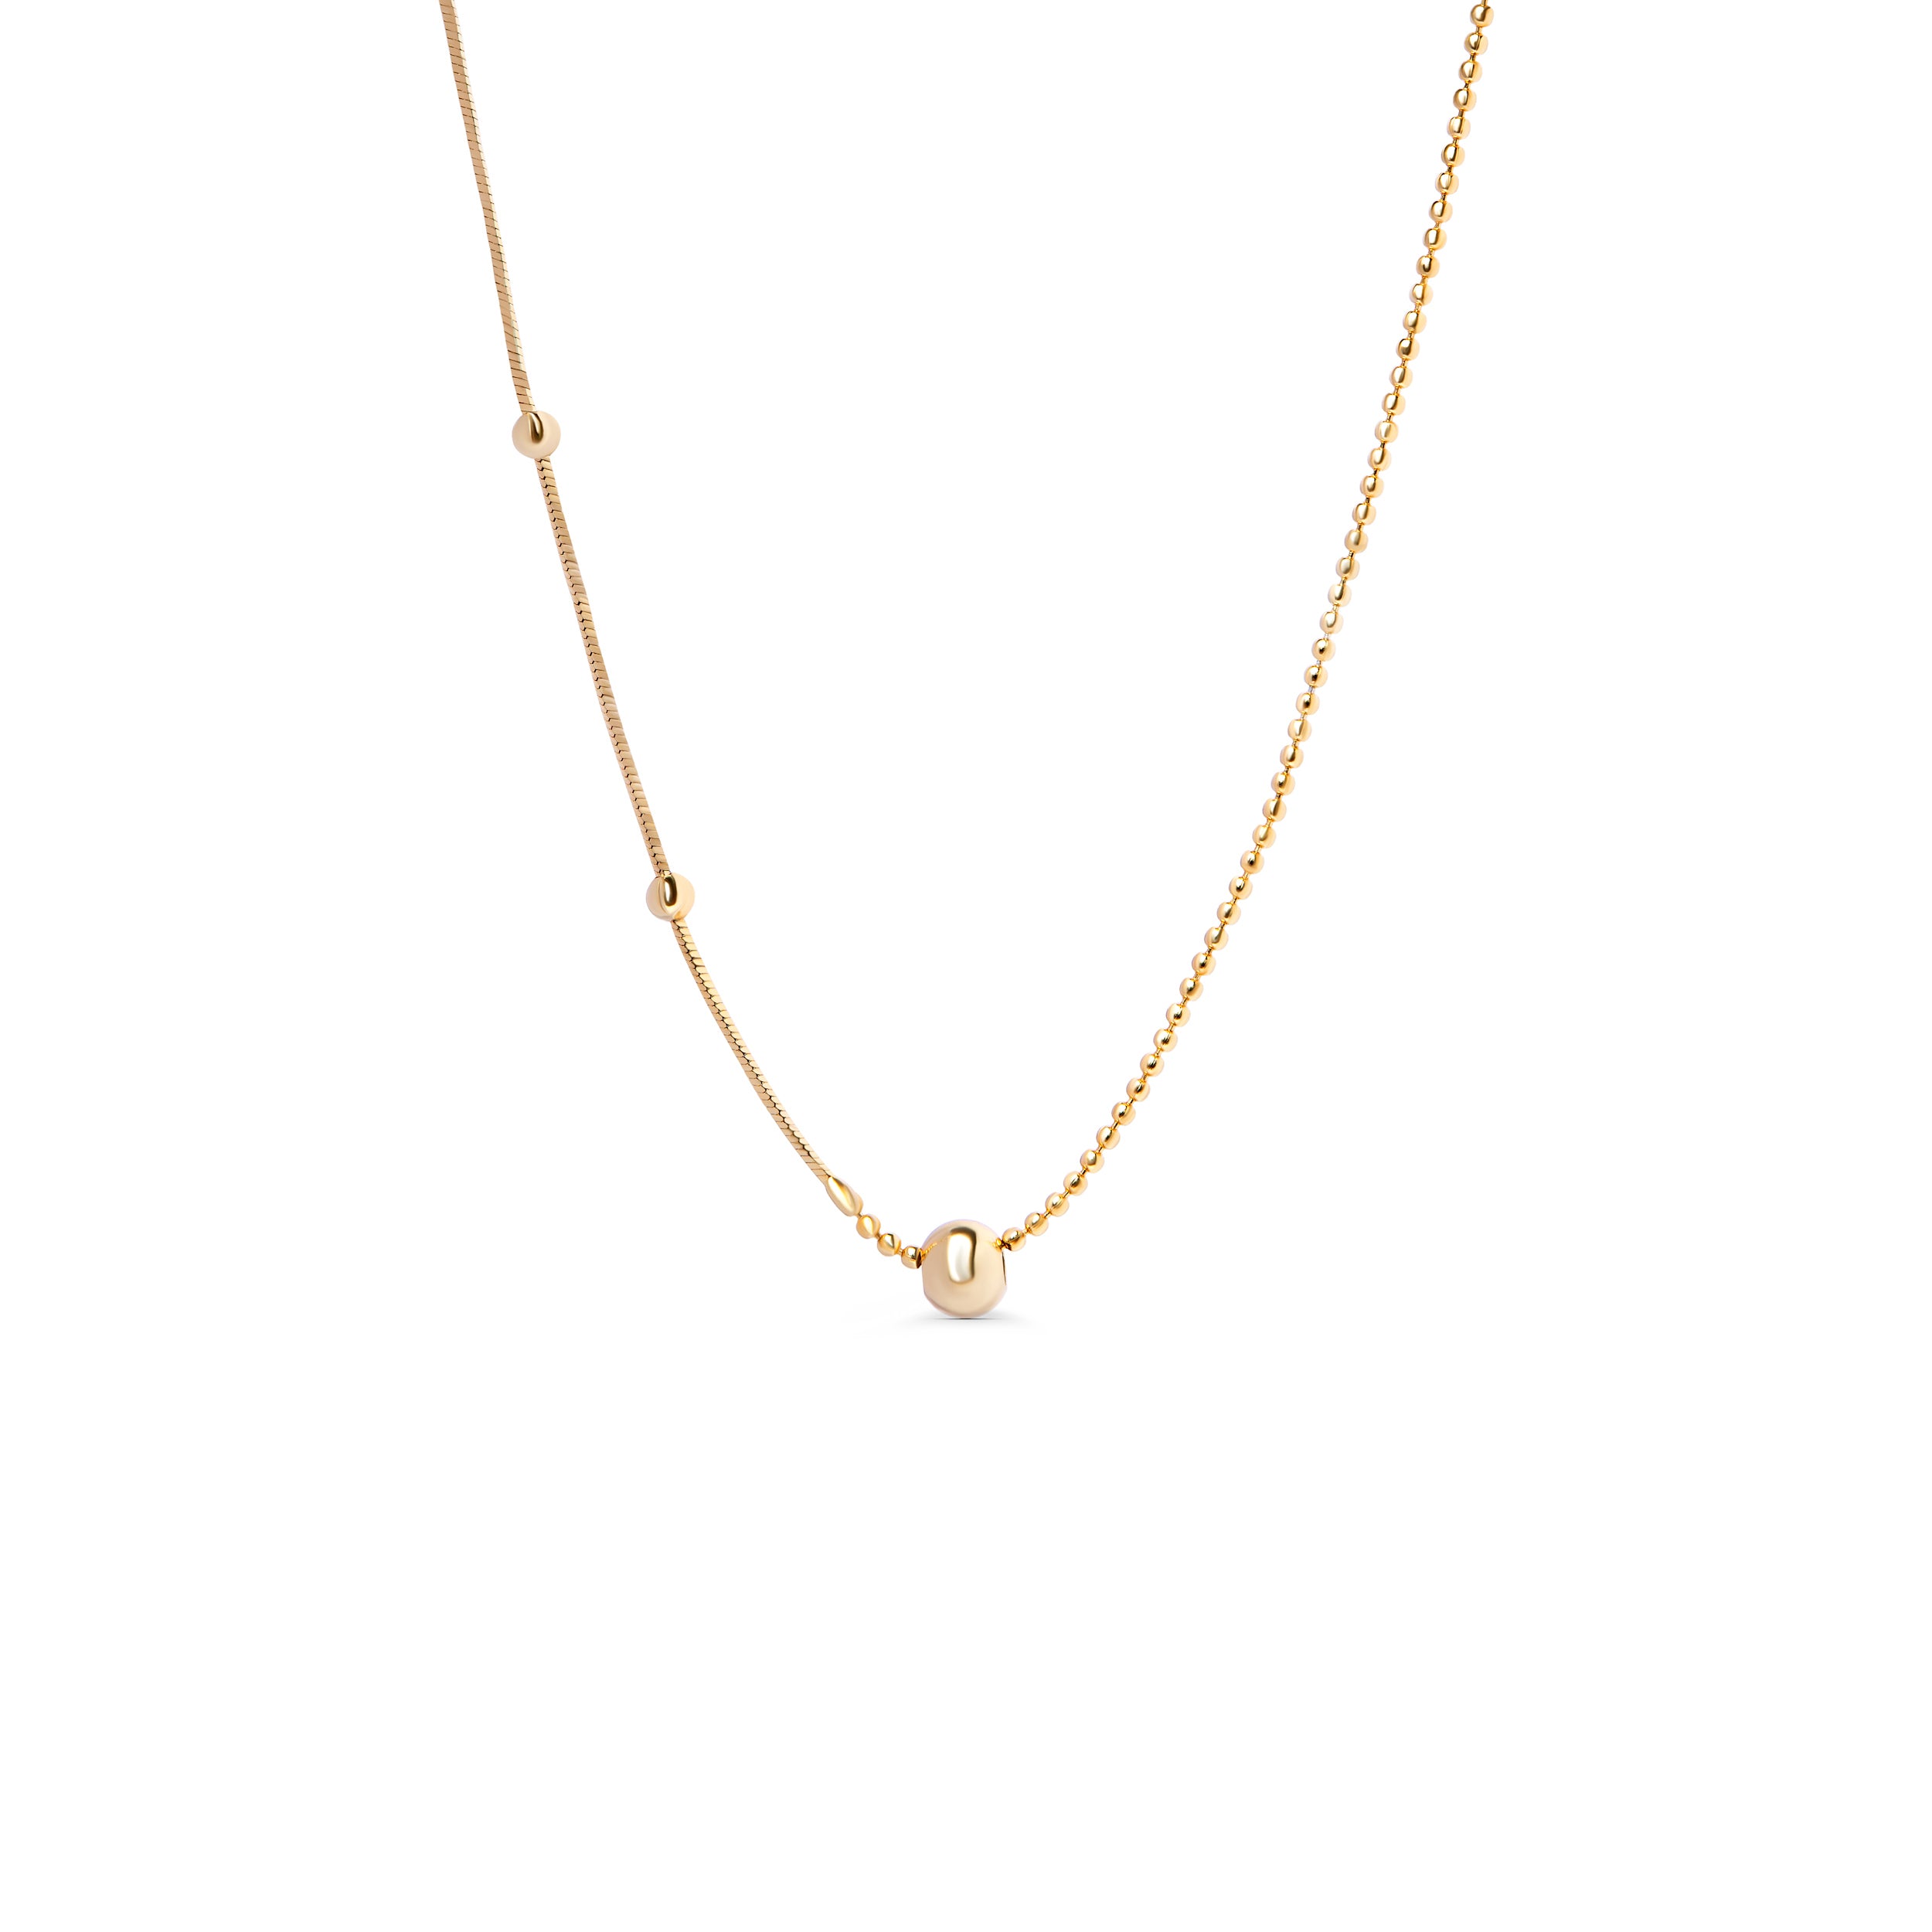 Gold droplets necklace